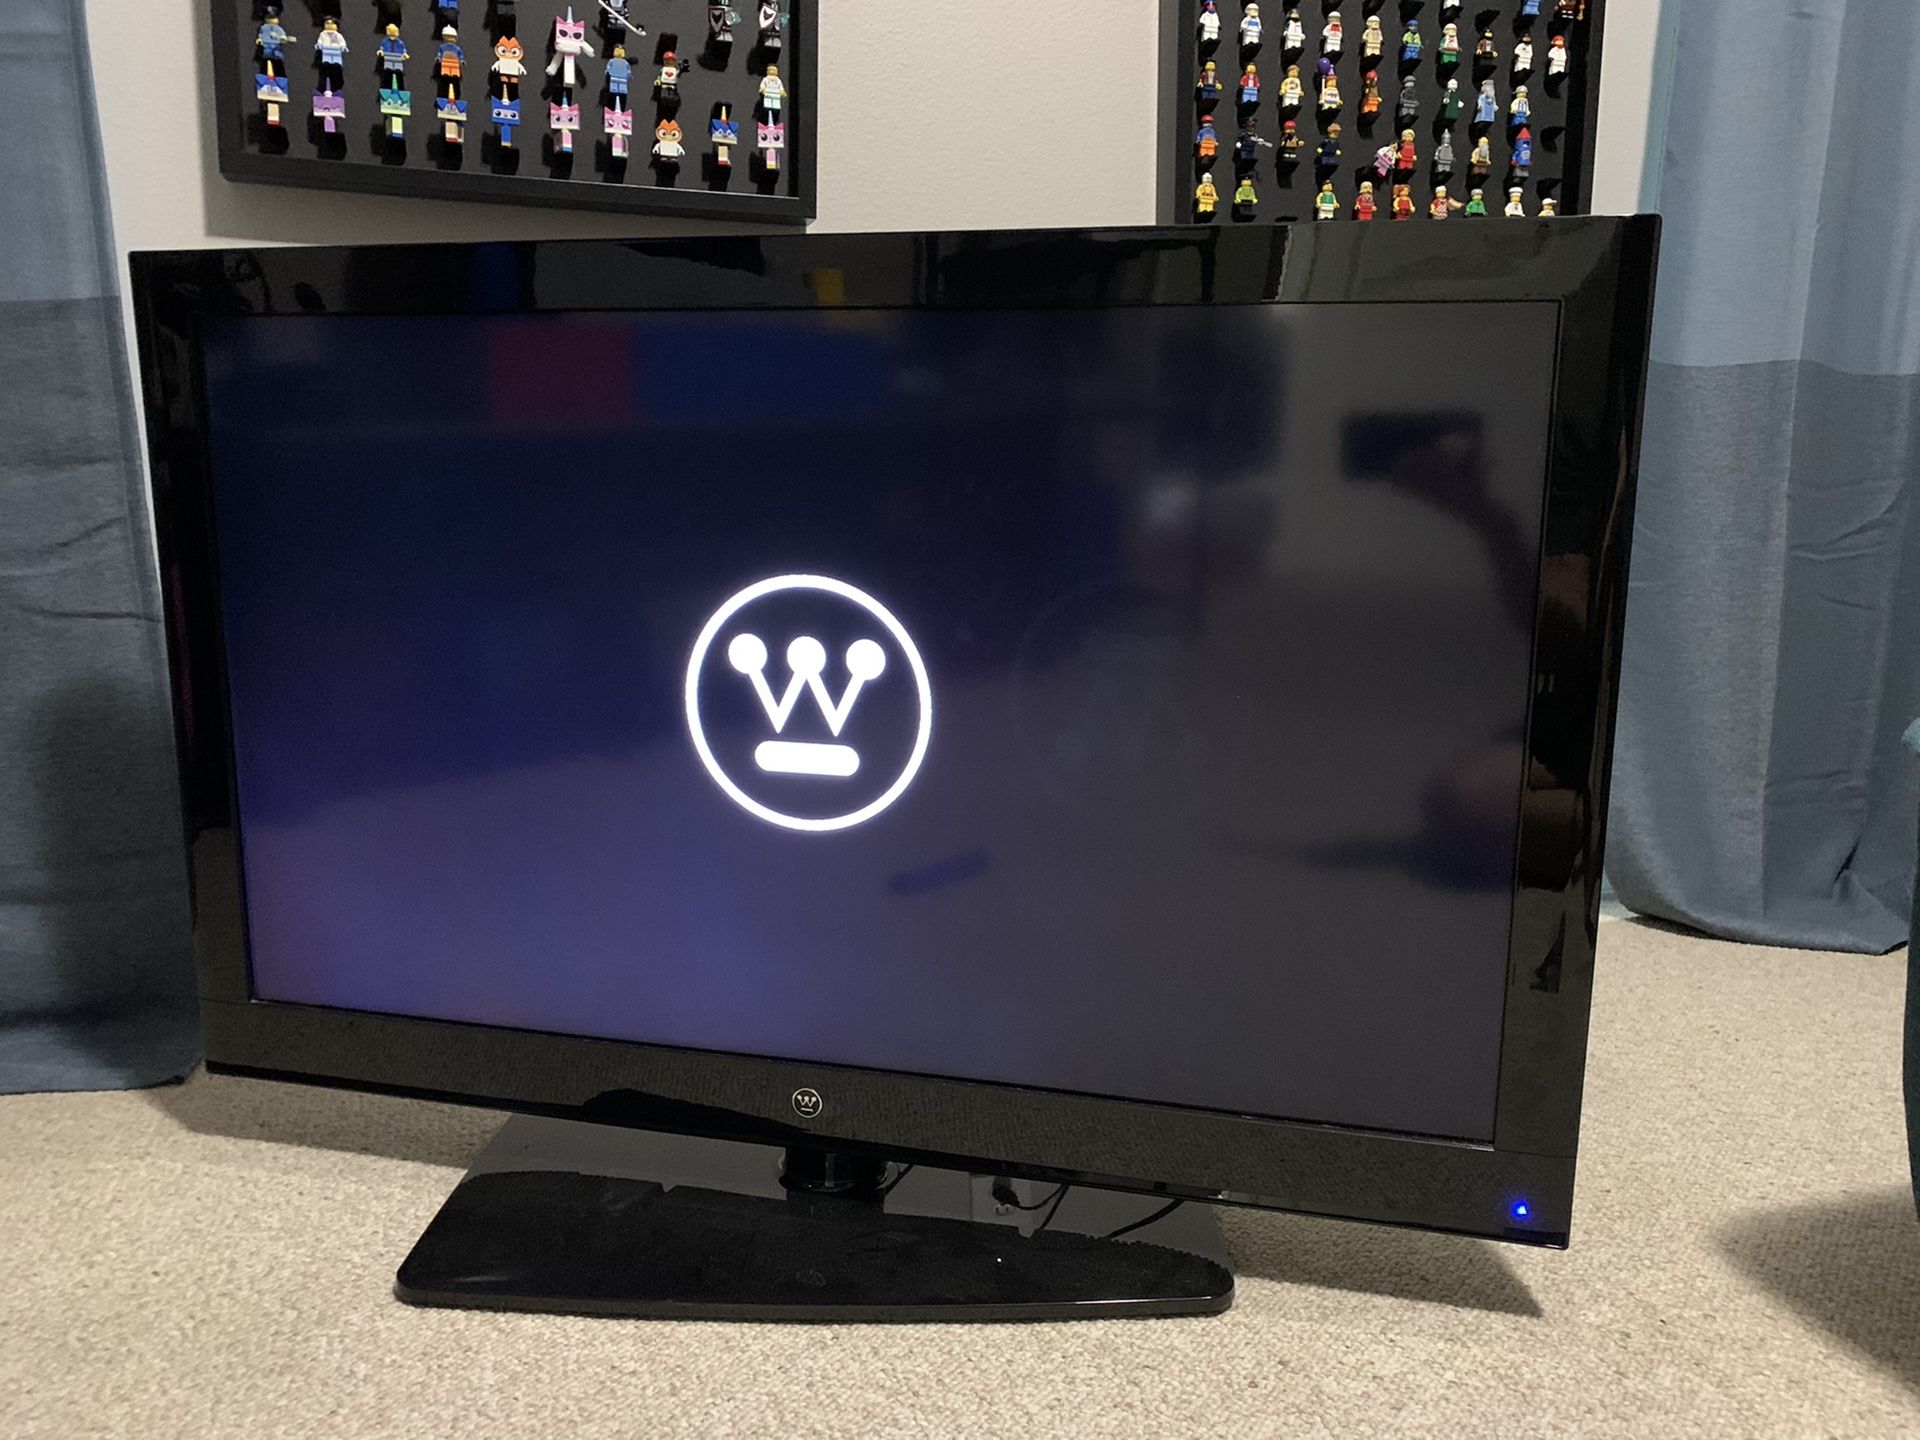 40 inch tv Westinghouse